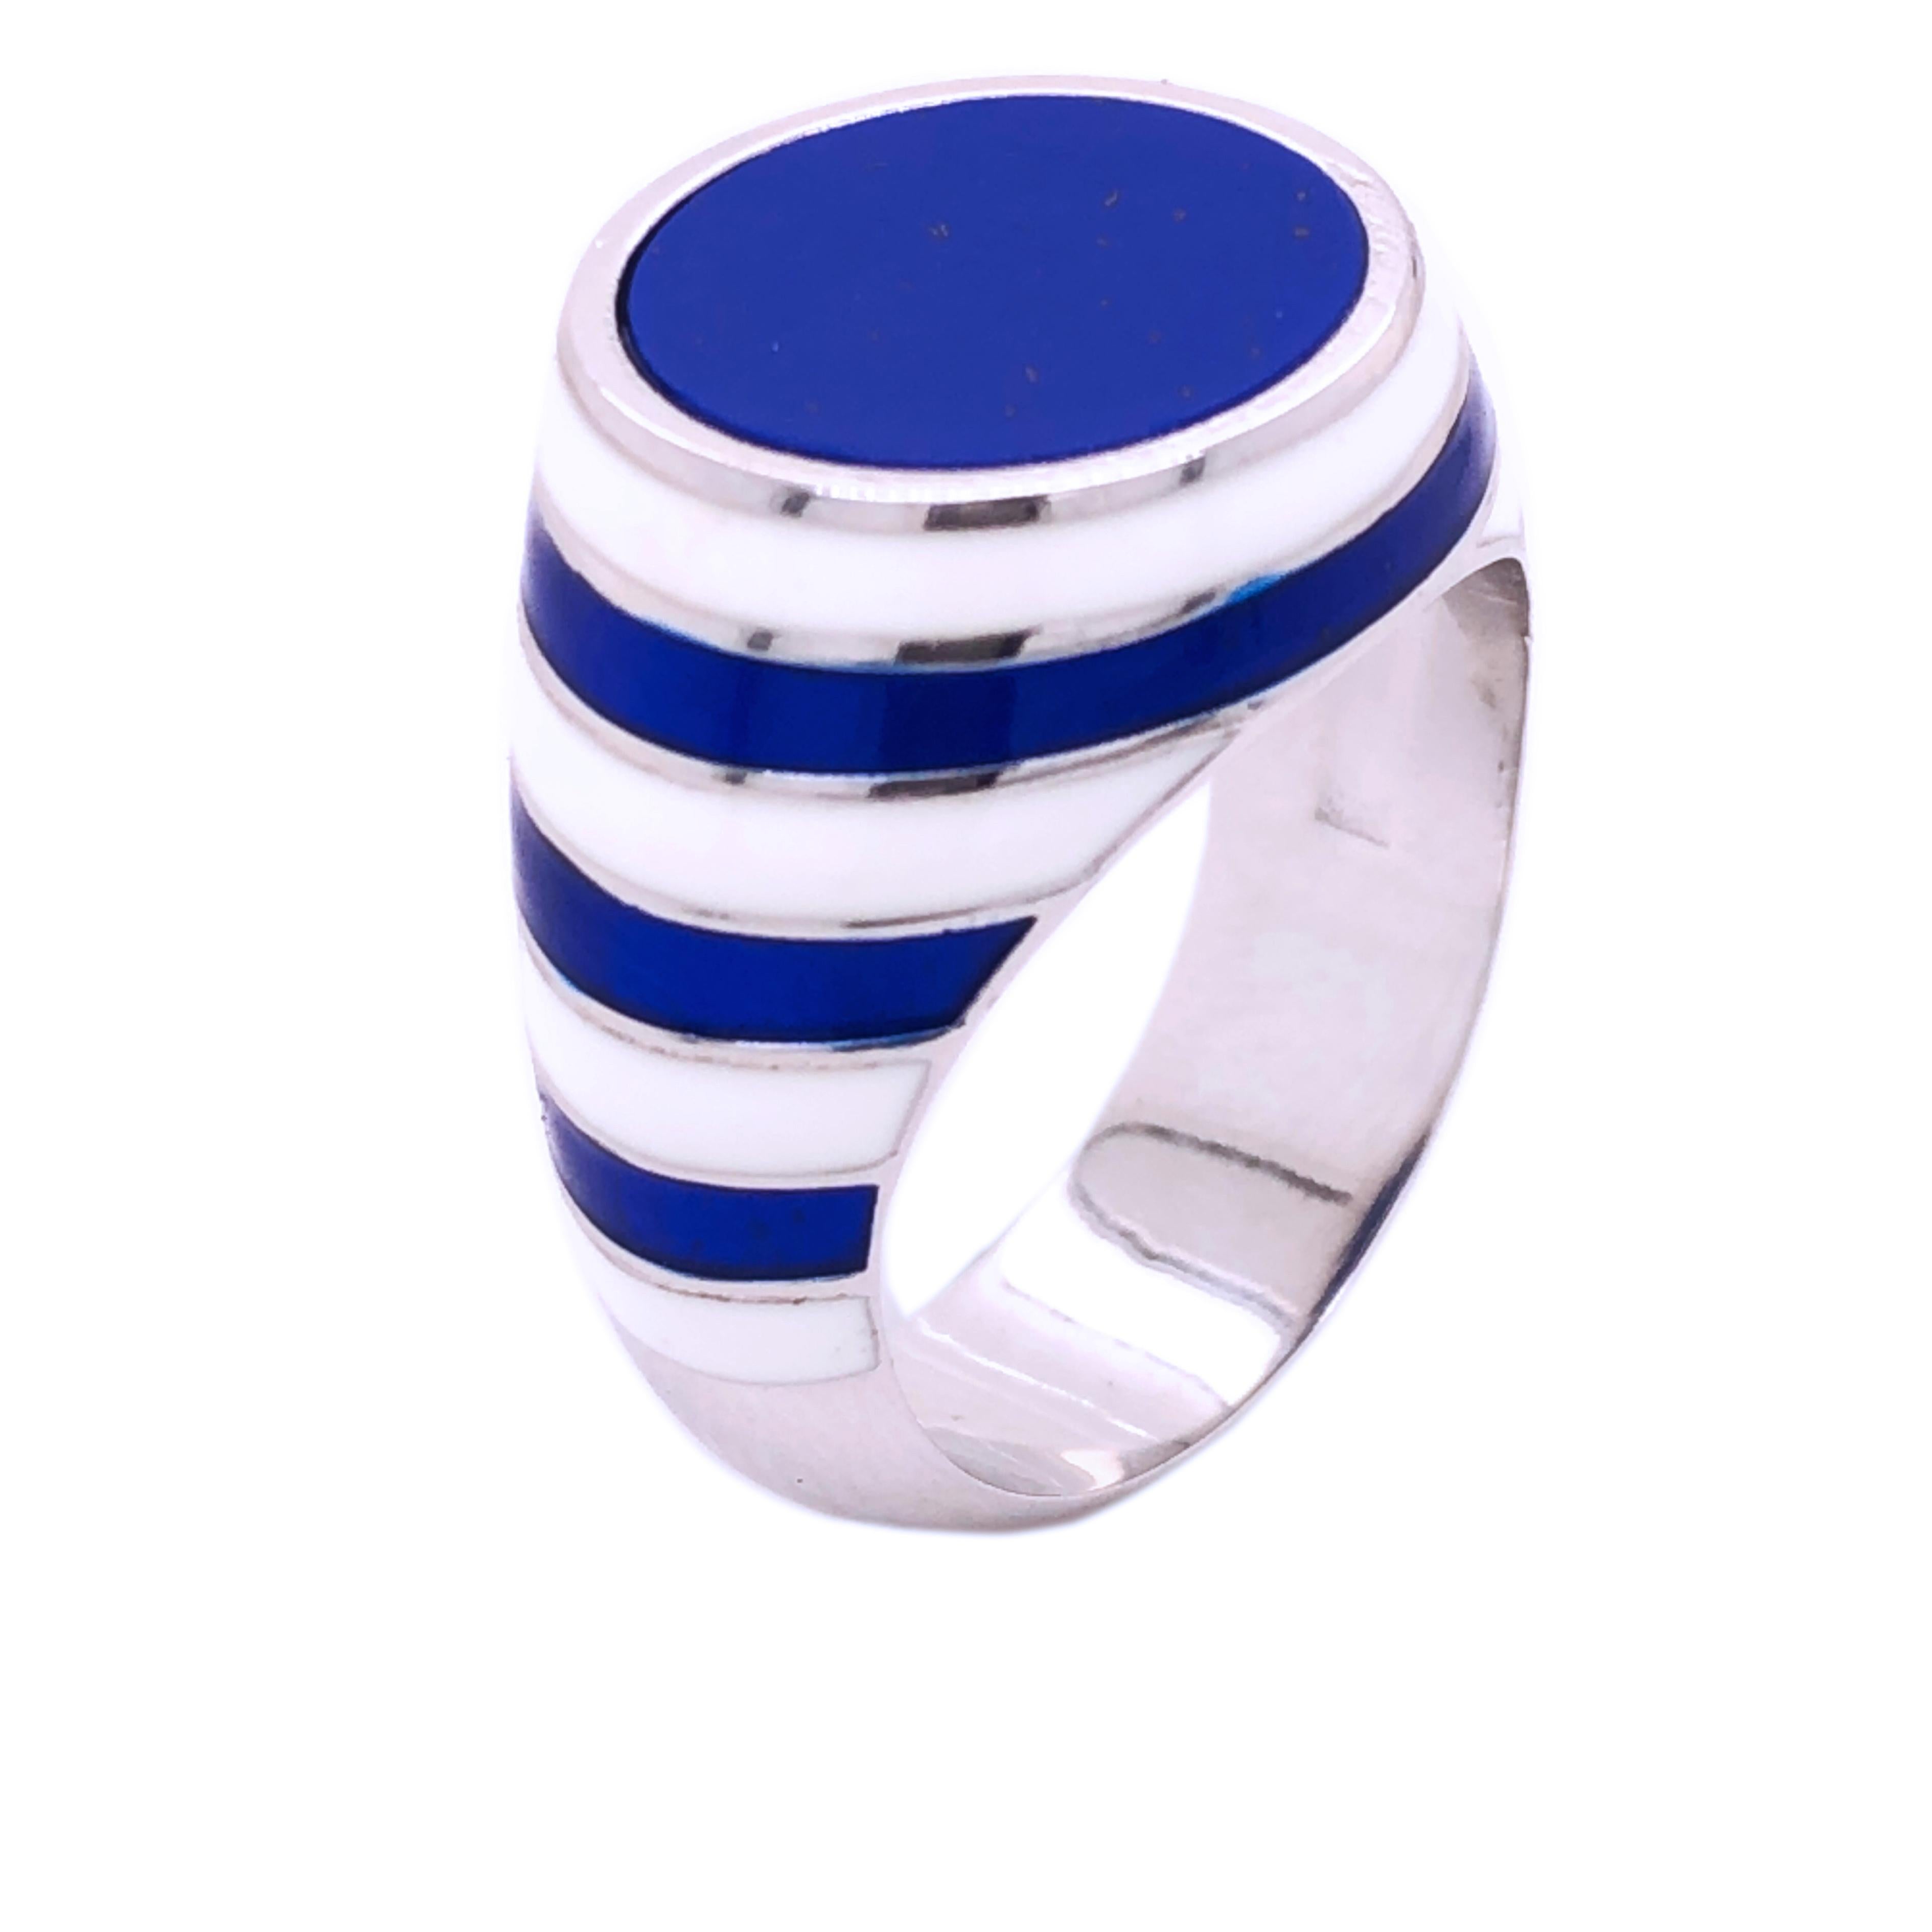 Contemporary, Chic yet Unique Cocktail Ring featuring a round natural Lapis Lazuli disk in a white and navy blue hand enameled stripes motif in a solid sterling silver setting.
In our smart Suede brown Box and pouch.
Us Size 5 1/2 French Size 51

